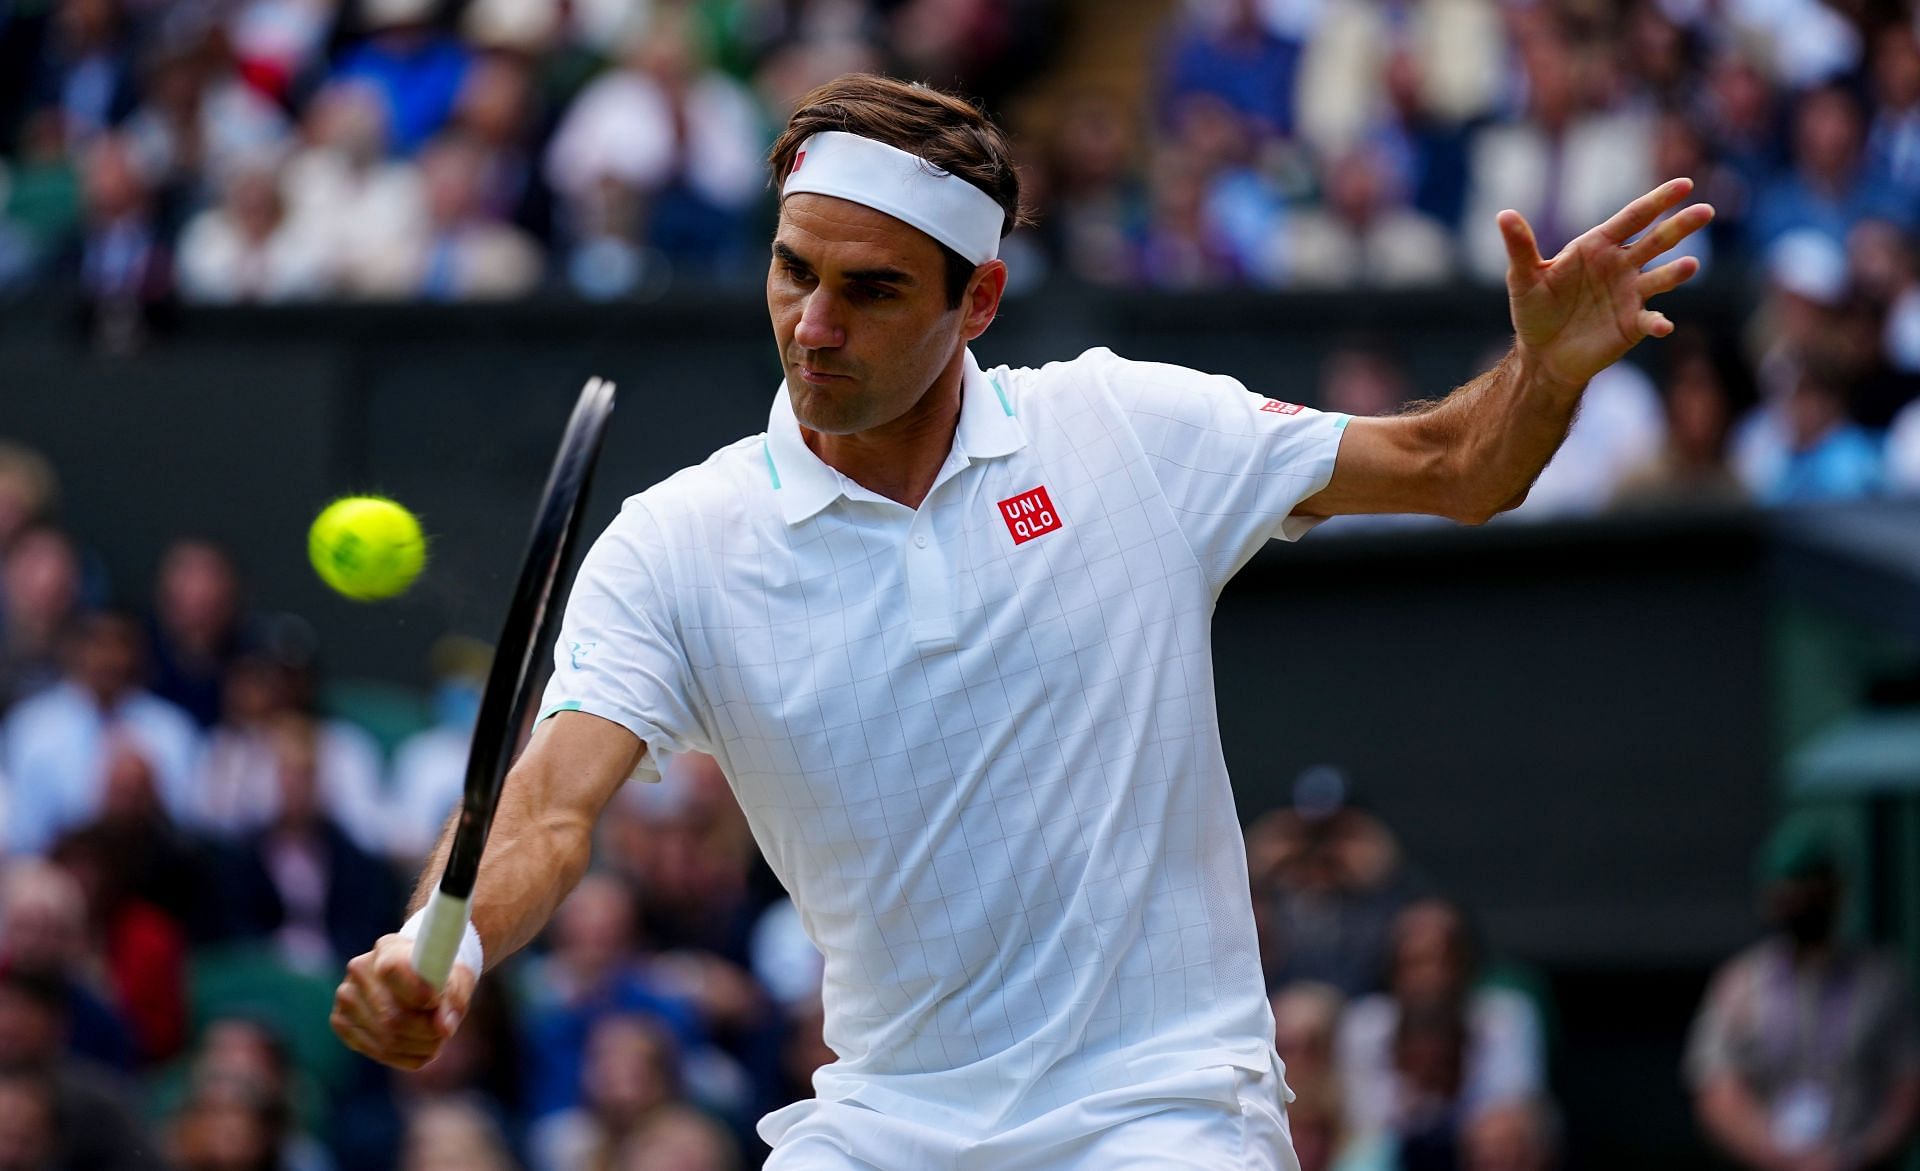 Roger Federer may be the most talented, but is that enough to be the GOAT?